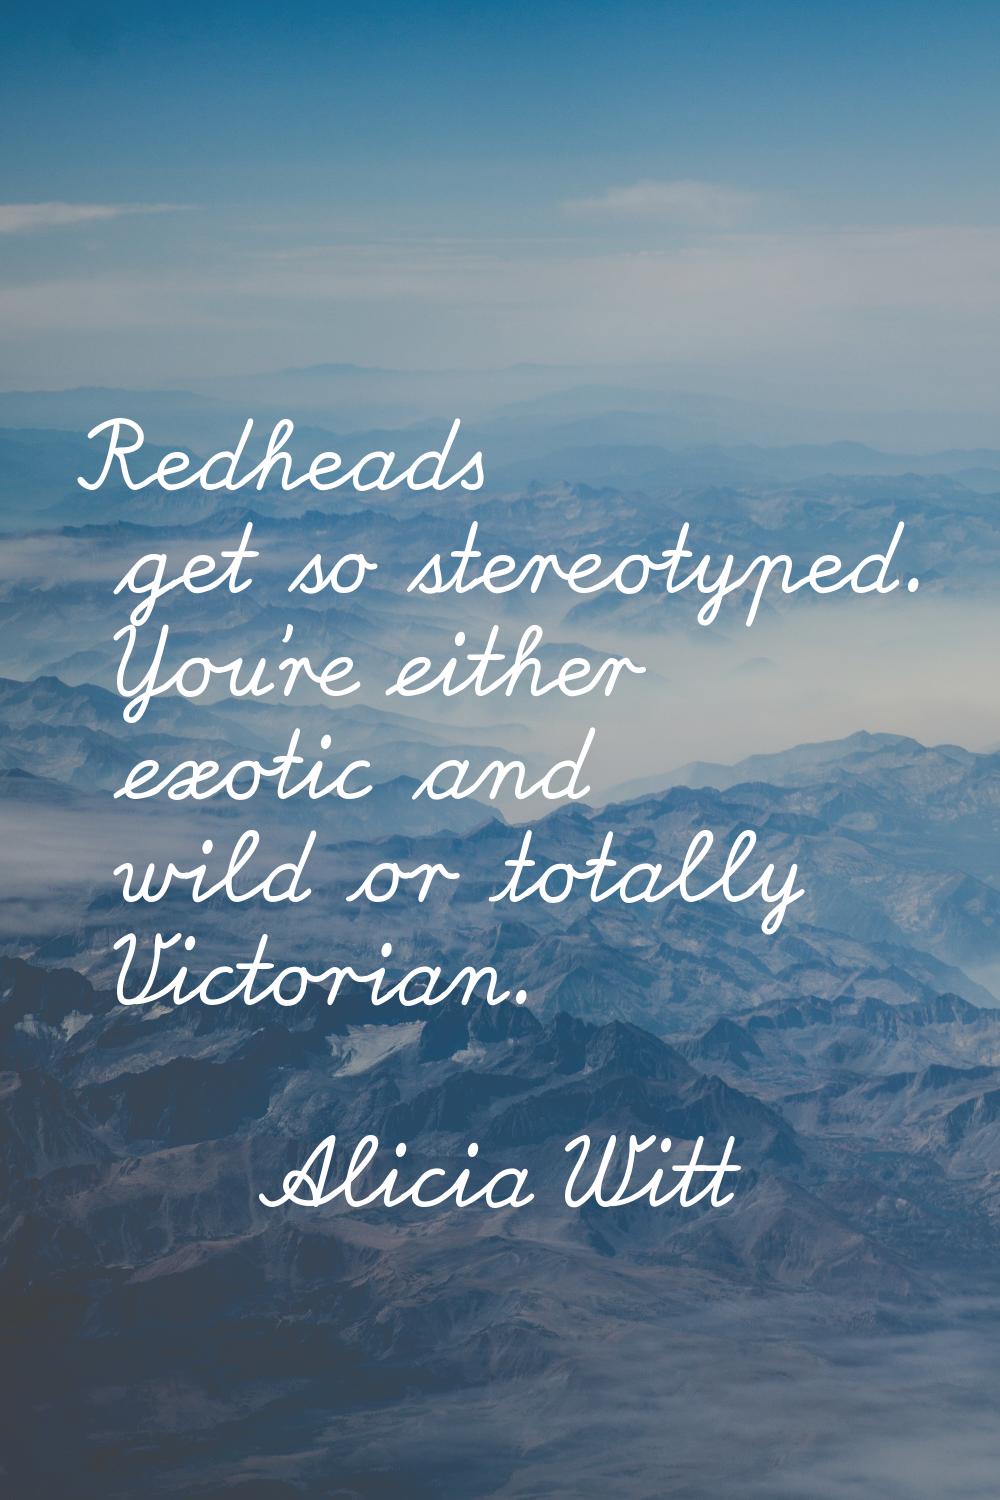 Redheads get so stereotyped. You're either exotic and wild or totally Victorian.